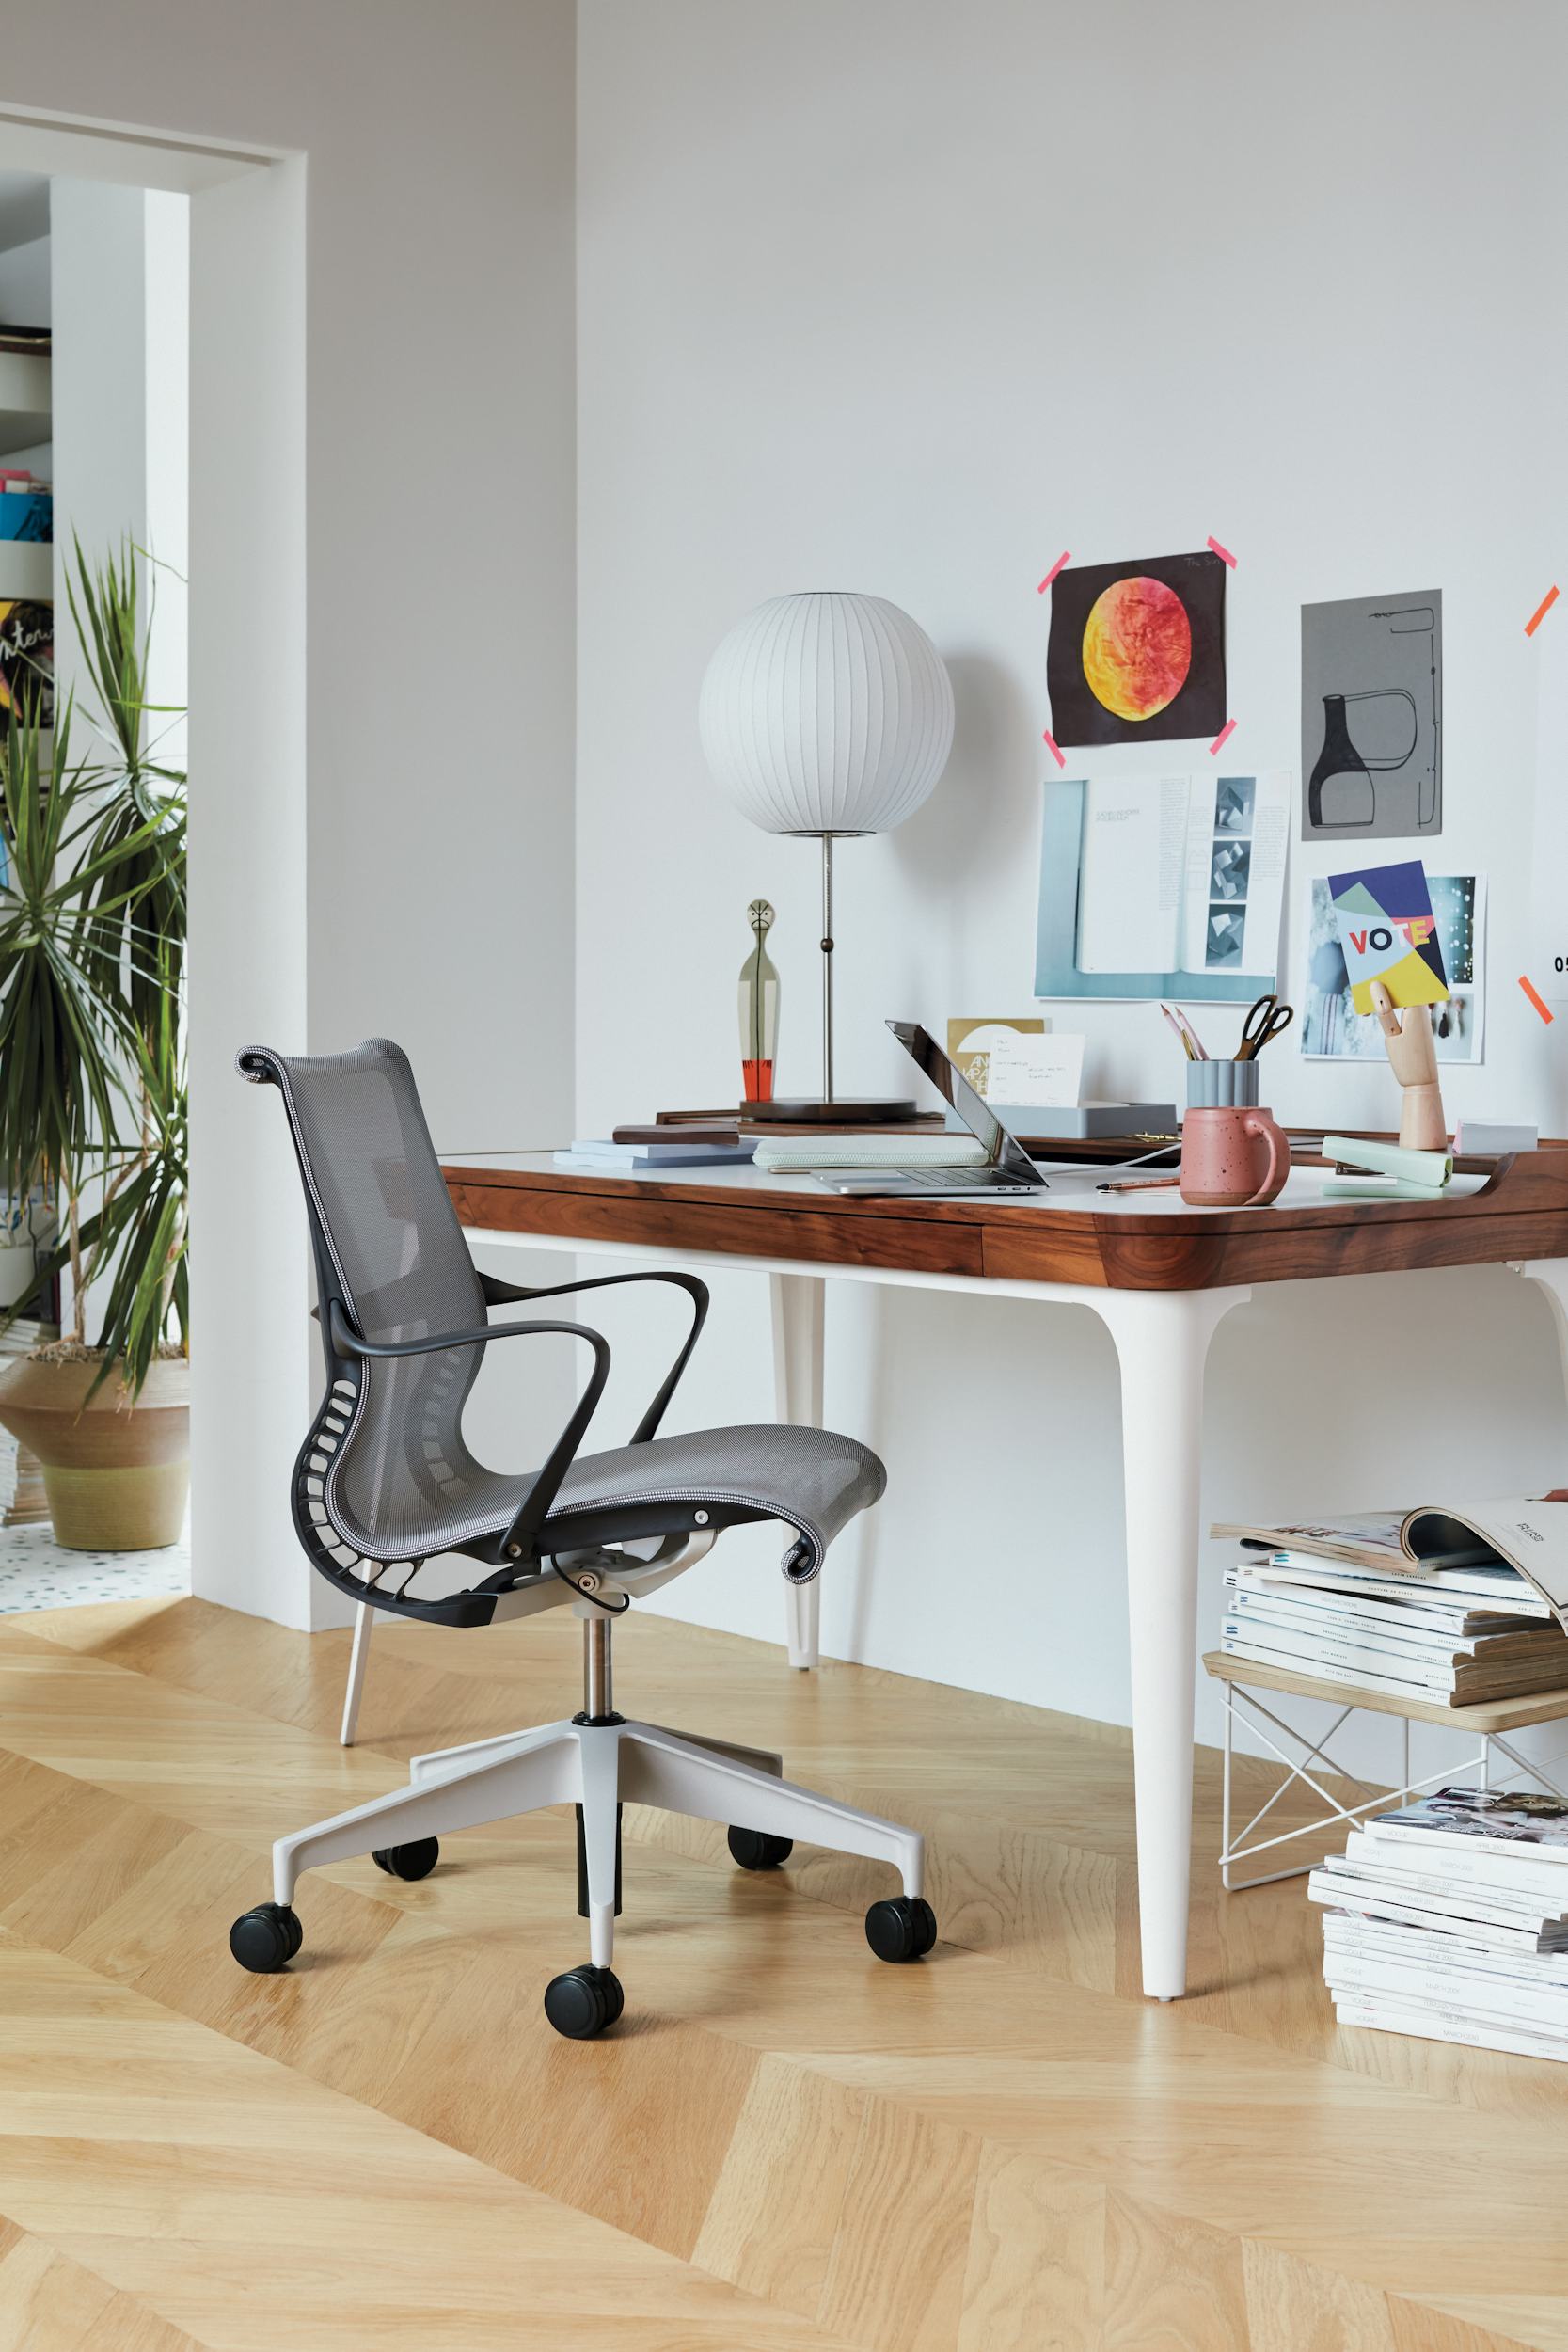 Office Chairs - Herman Miller